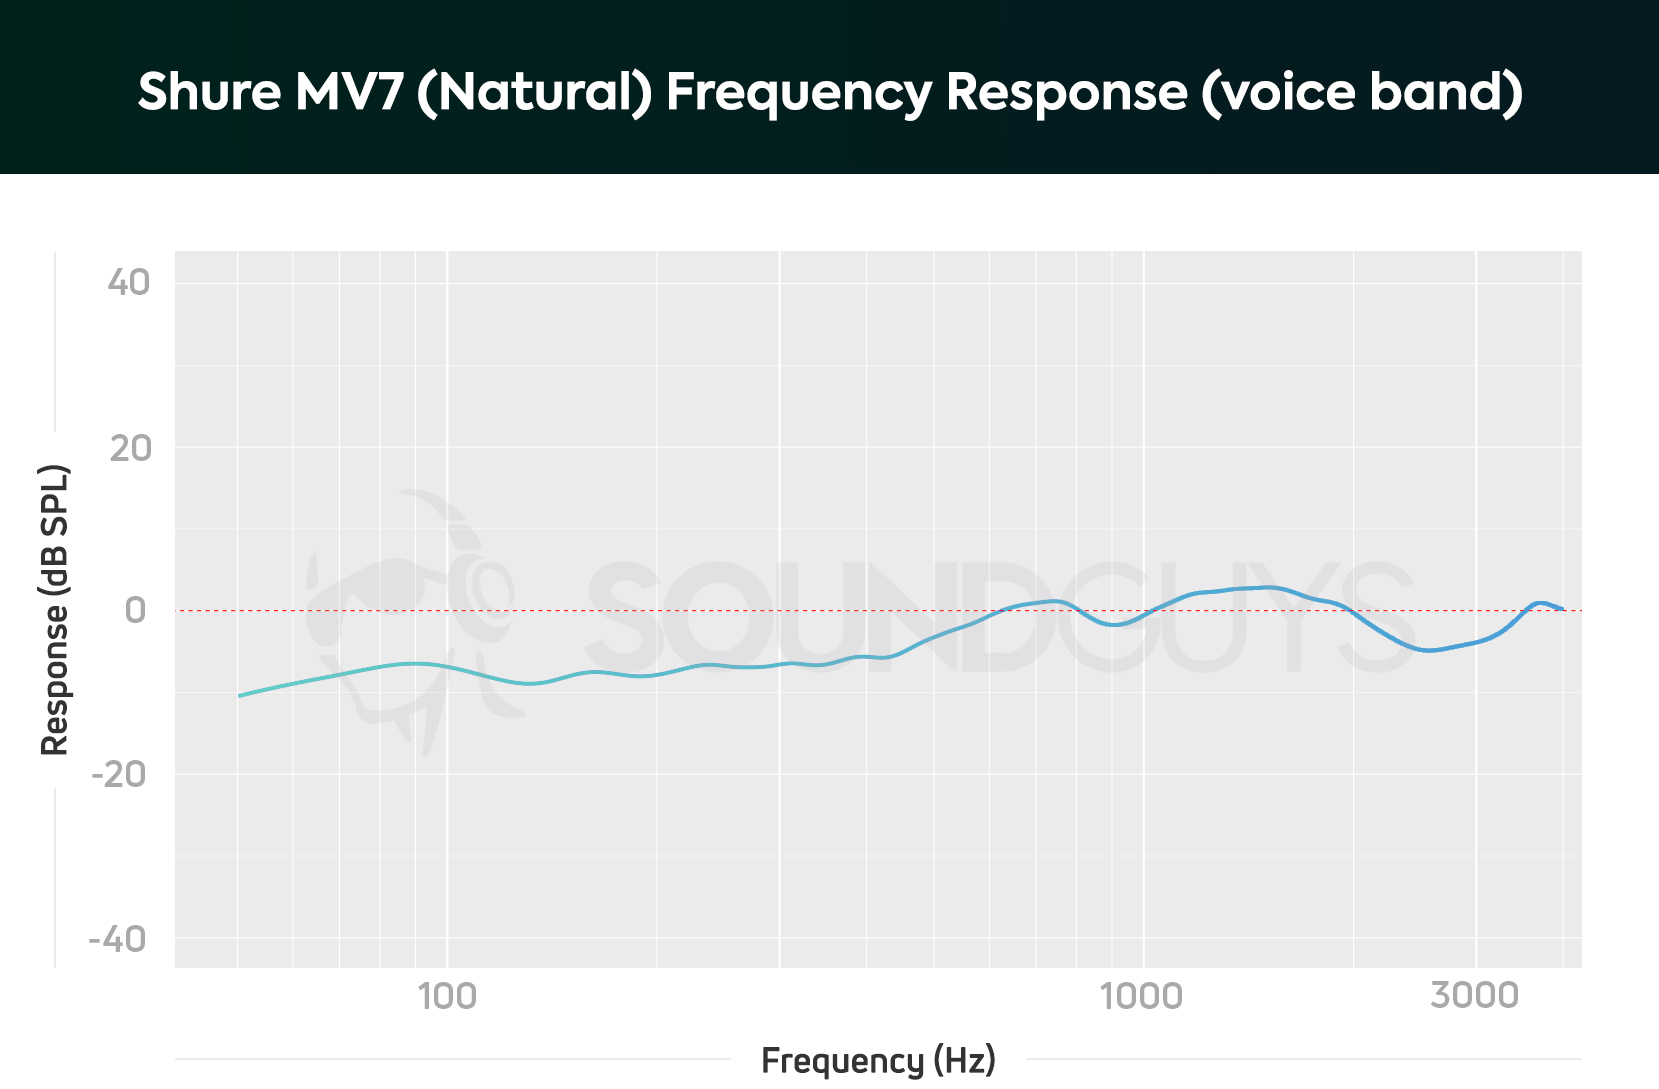 The Shure MV7 voice band frequency response with the "Natural" setting enabled; low frequency notes are half as loud as upper-midrange and treble frequency sounds.